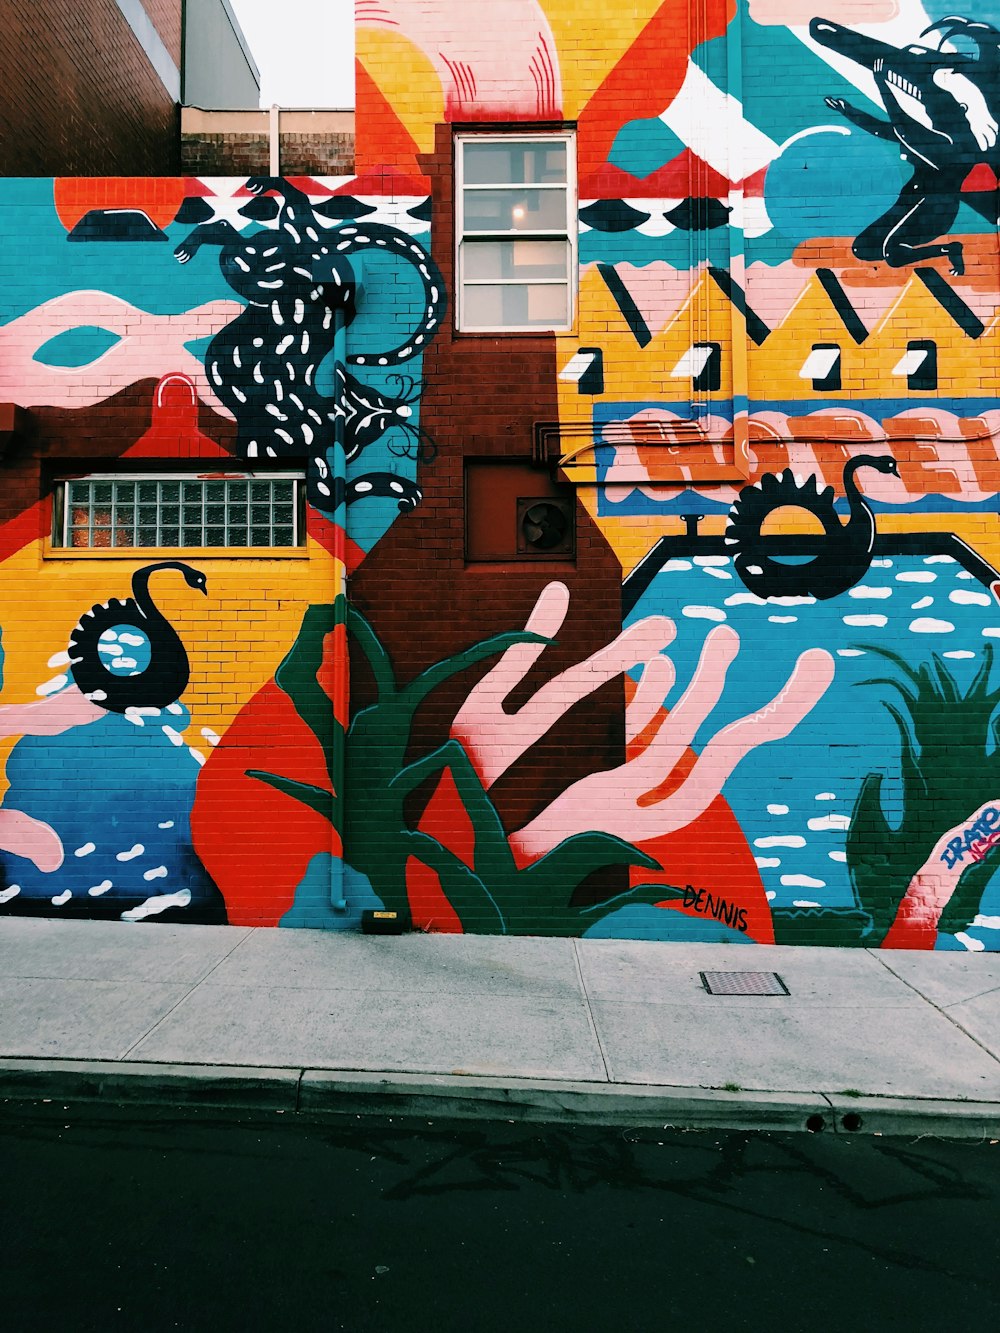 27+ Mural Pictures | Download Free Images on Unsplash